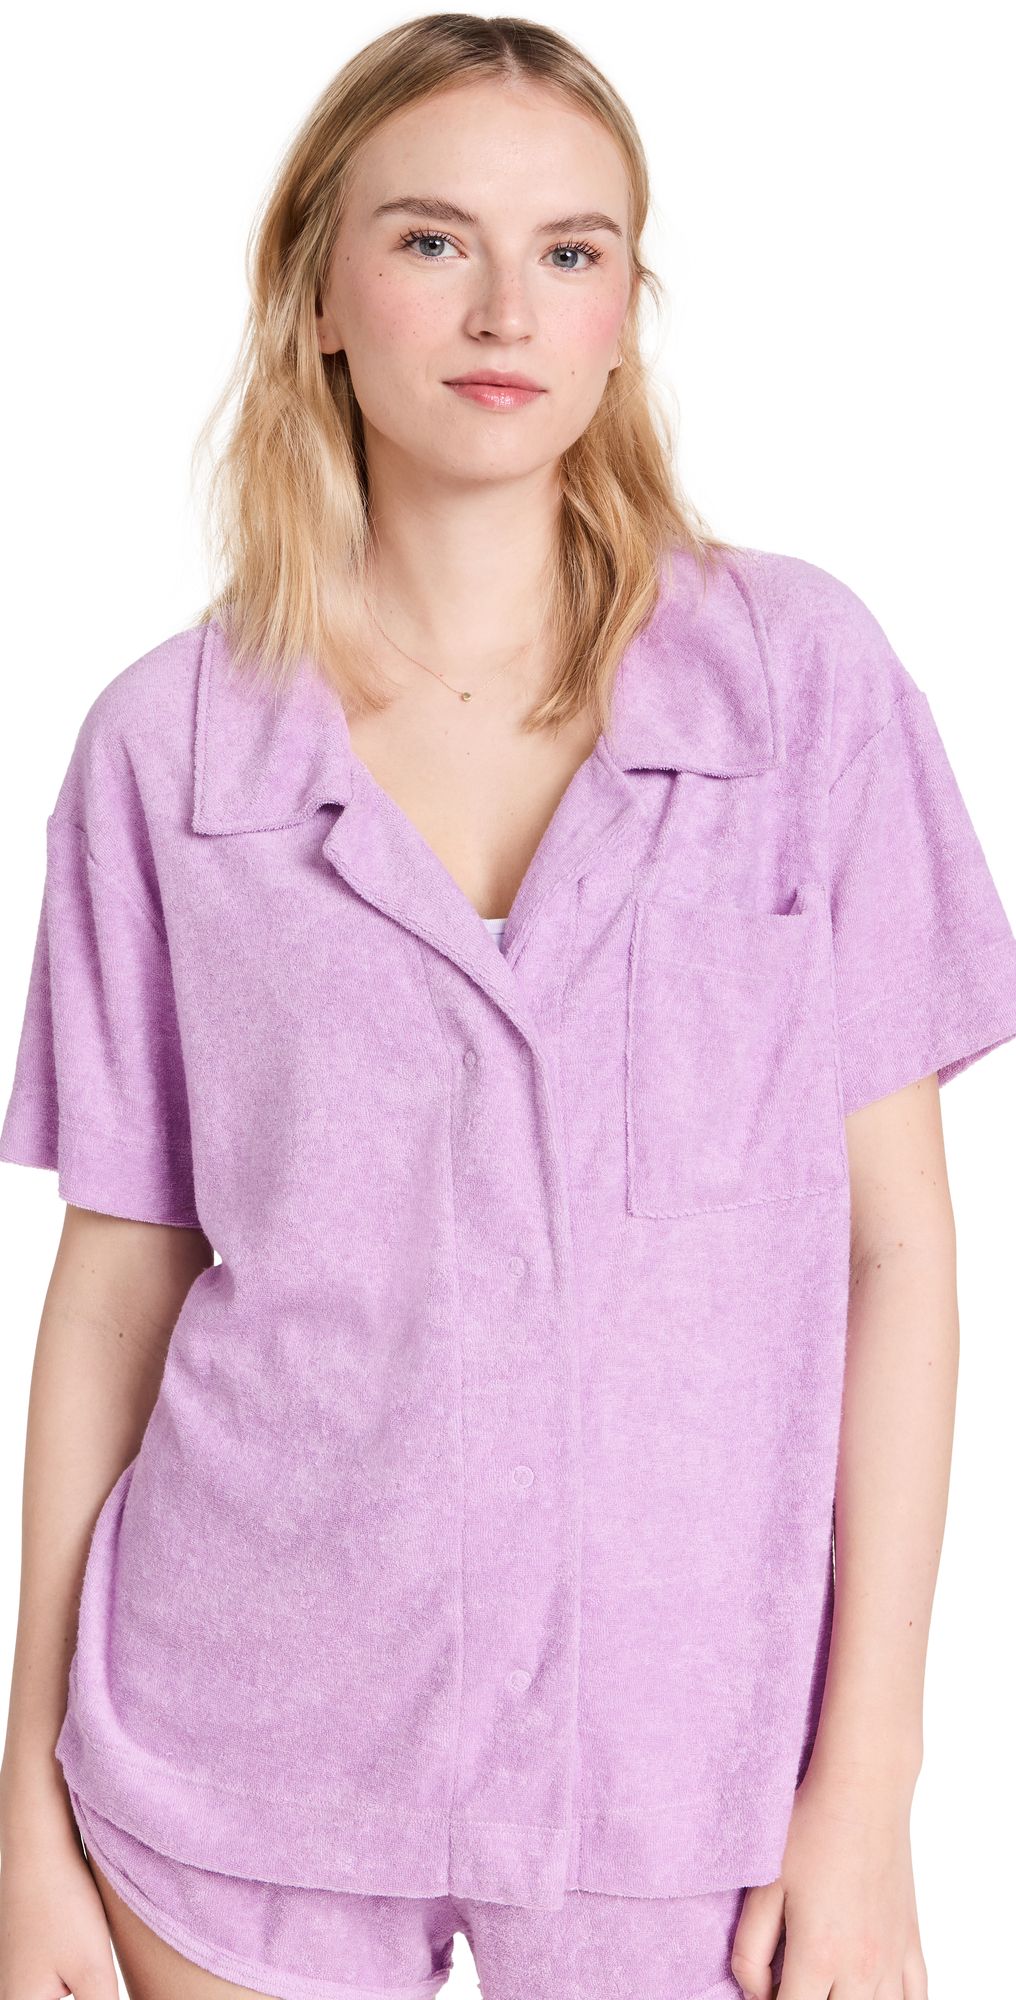 The Vacation Terry Shirt | Shopbop